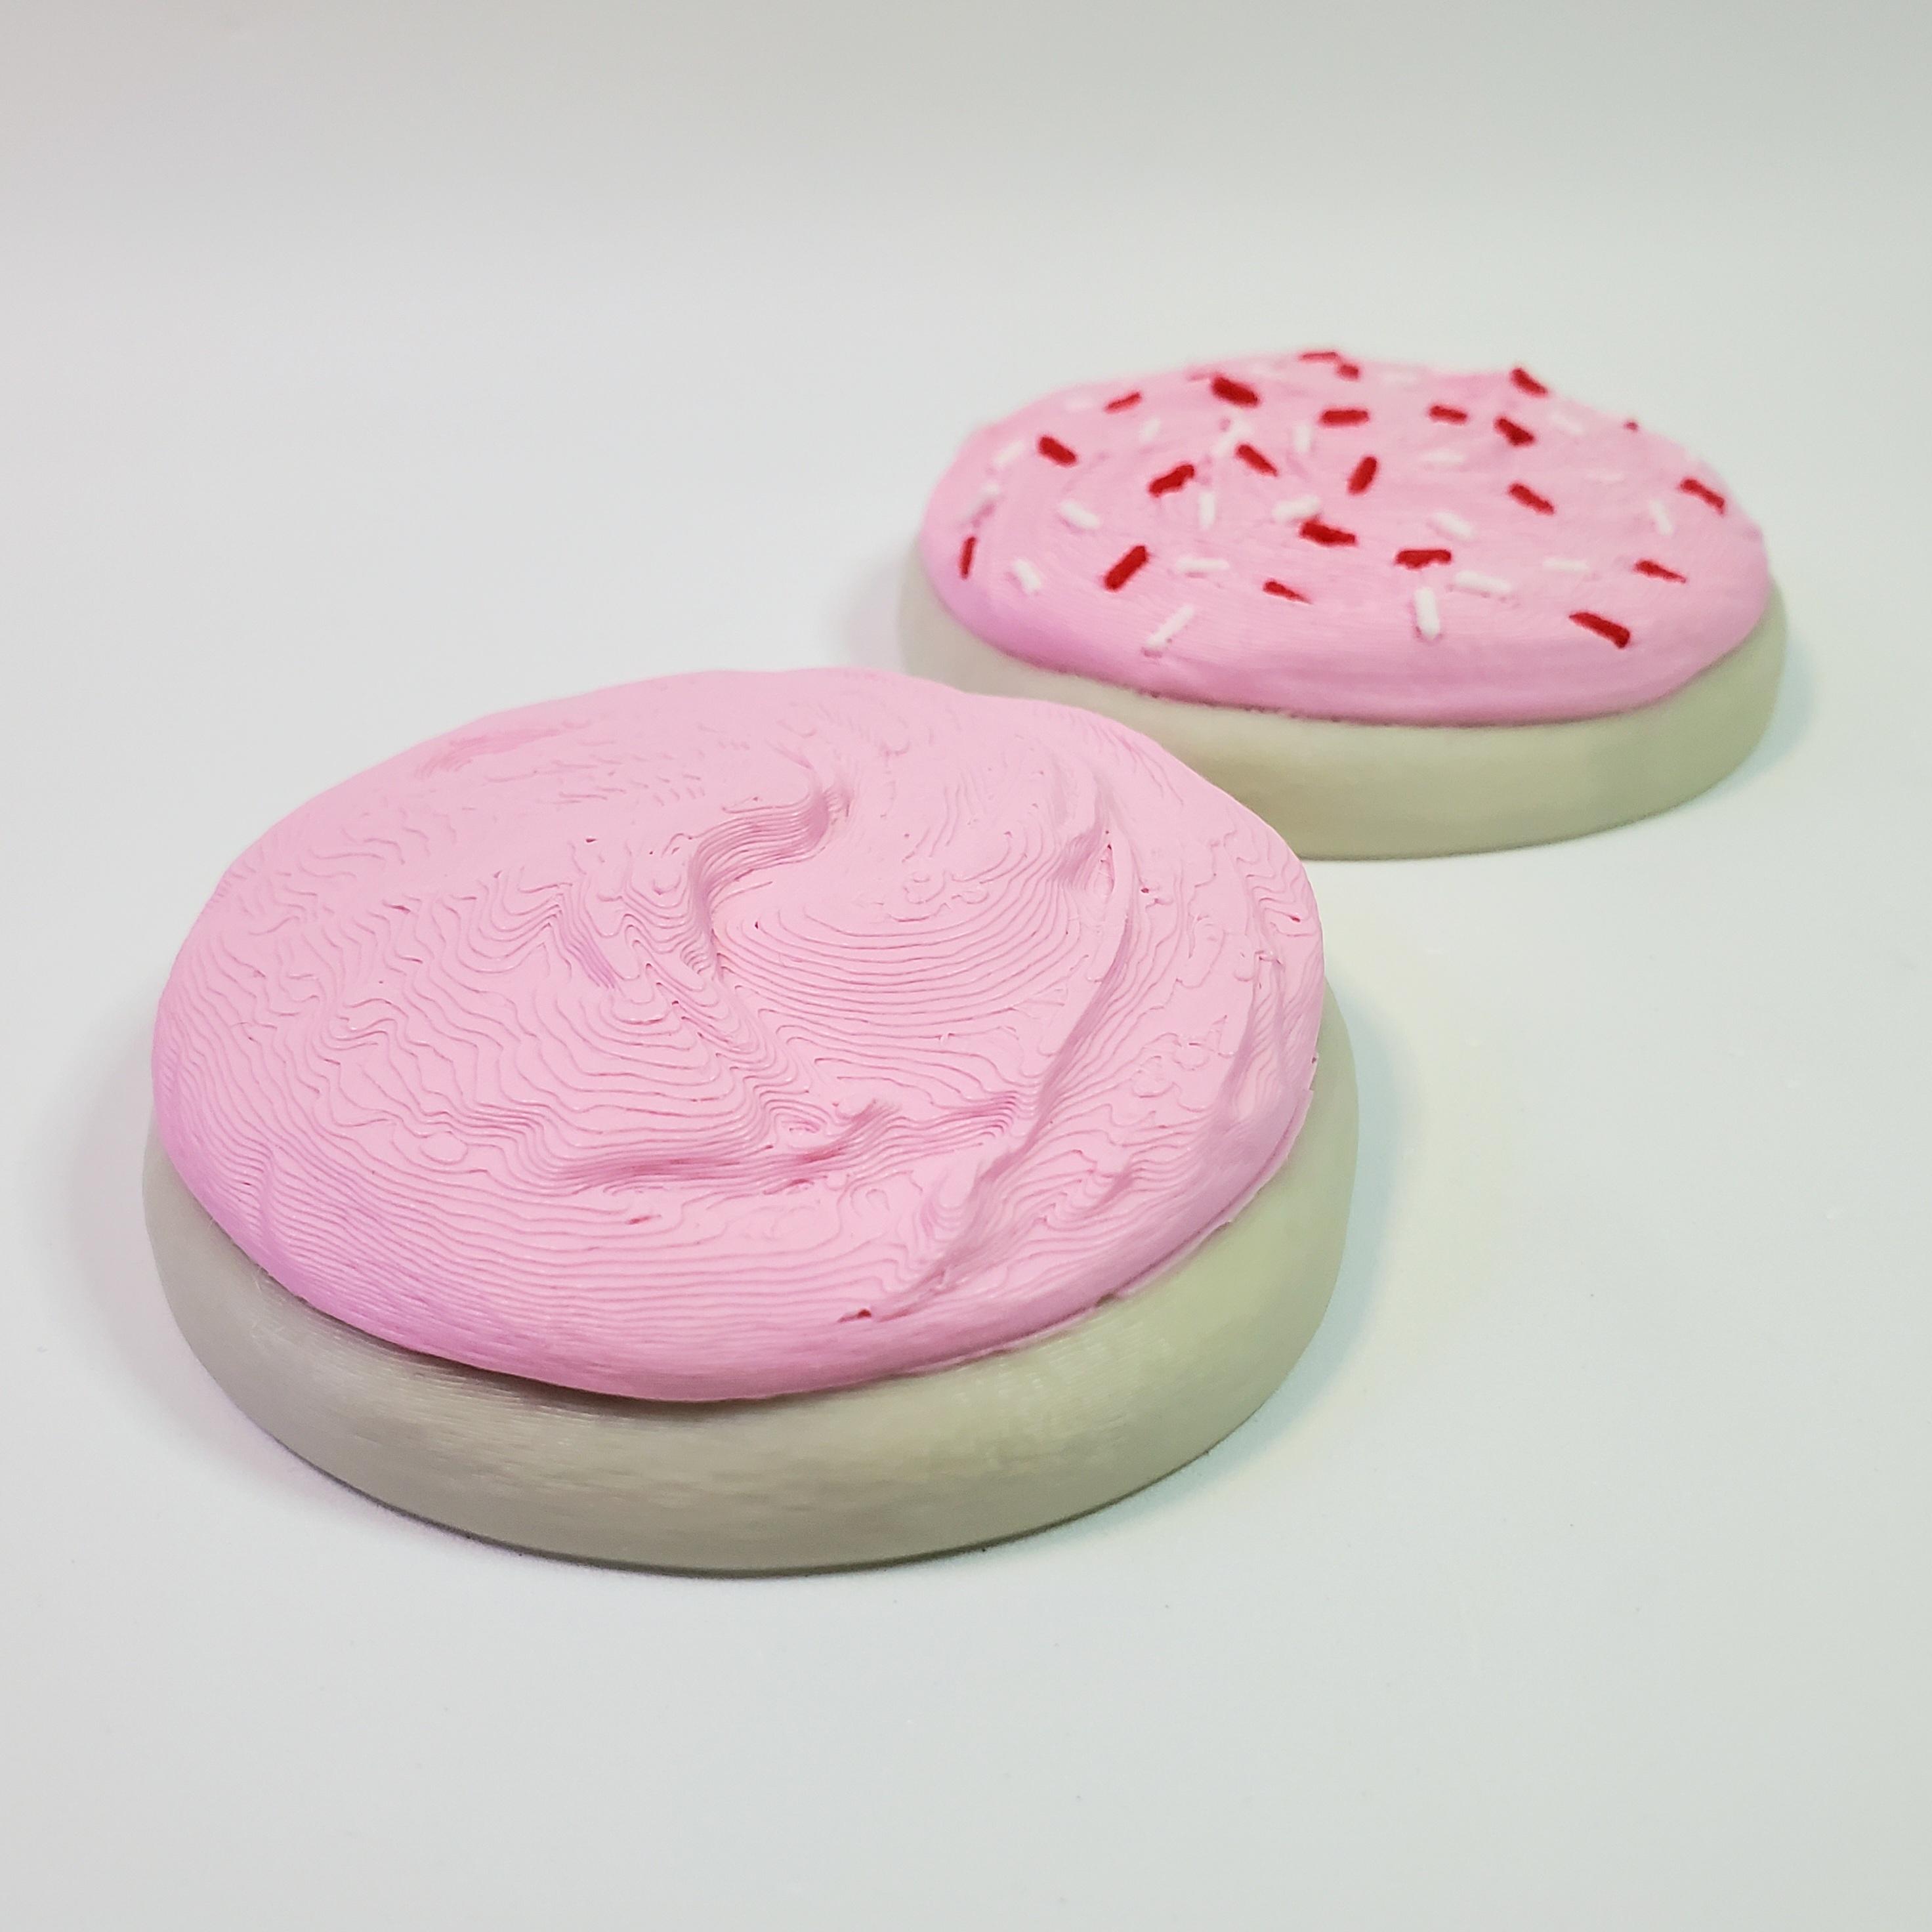 REMIXABLE Sugar Cookie with Buttermilk Frosting :: Delicious Desserts! 3d model